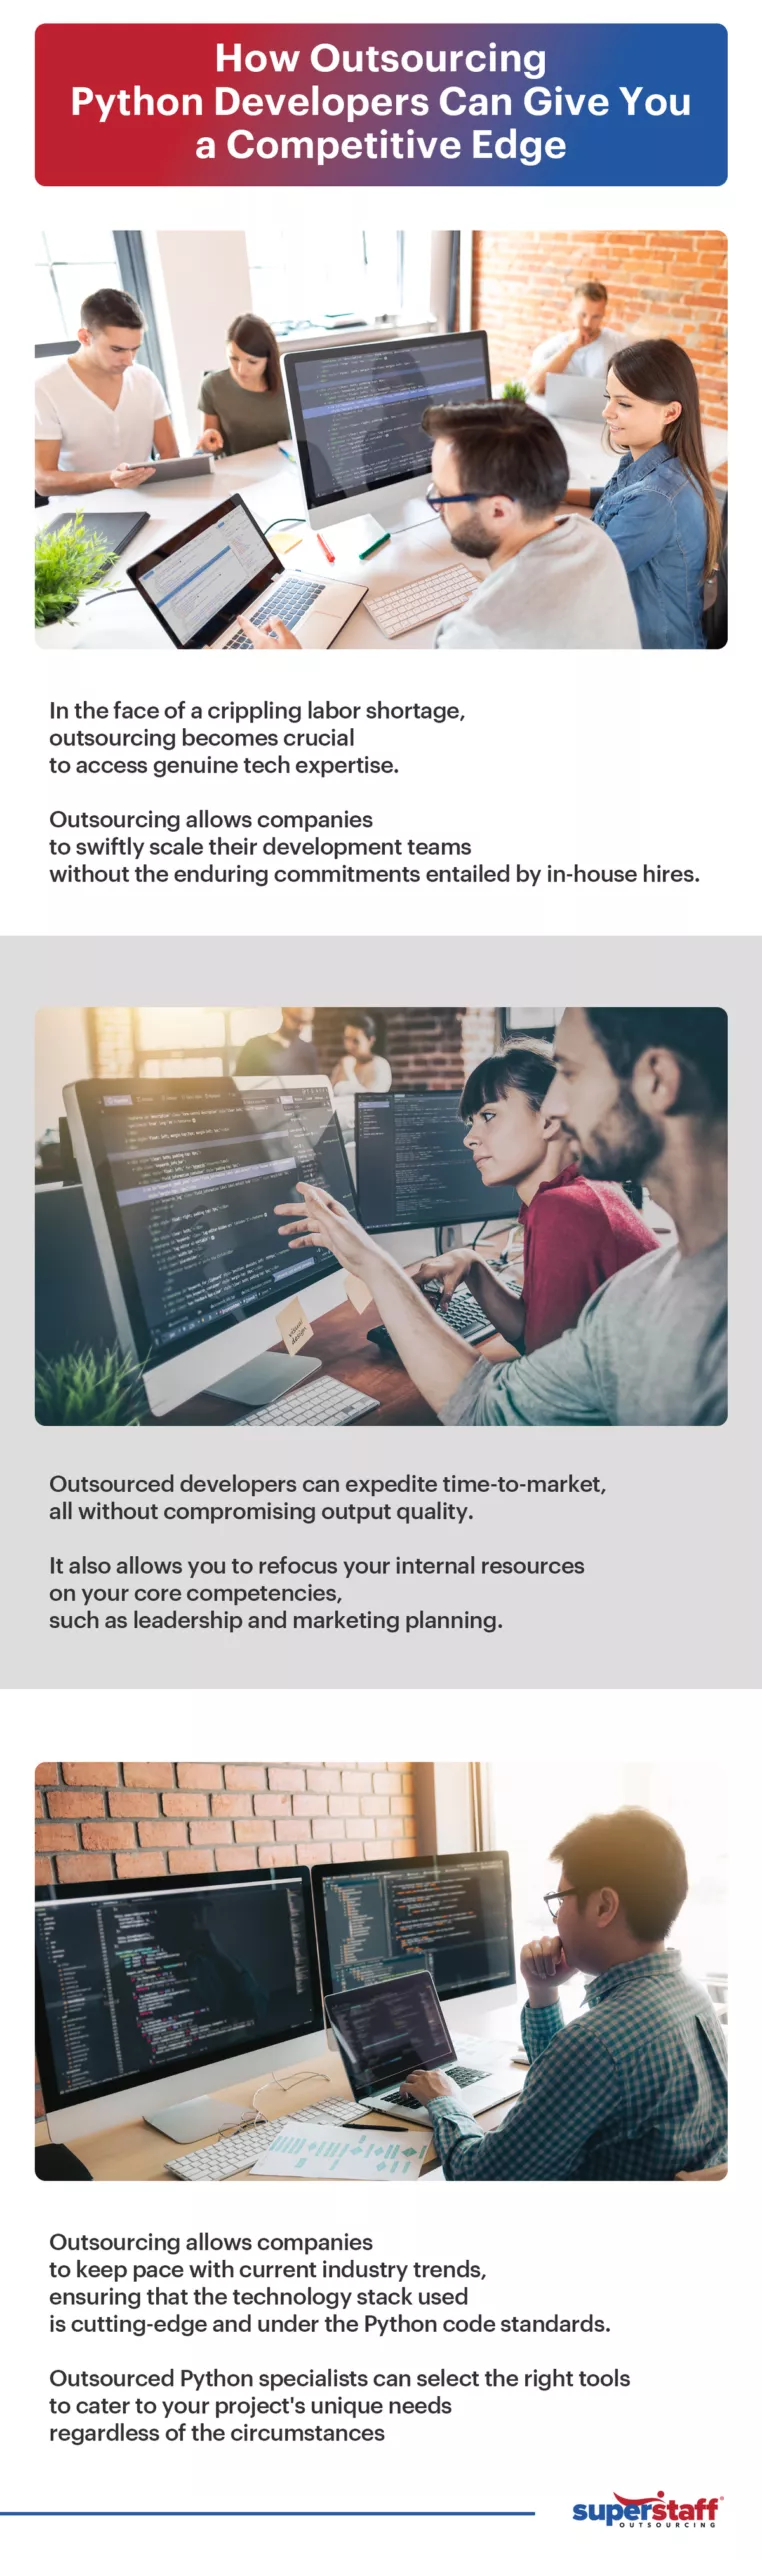 An infographic discussing how outsourced python developers can give your business a competitive advantage.